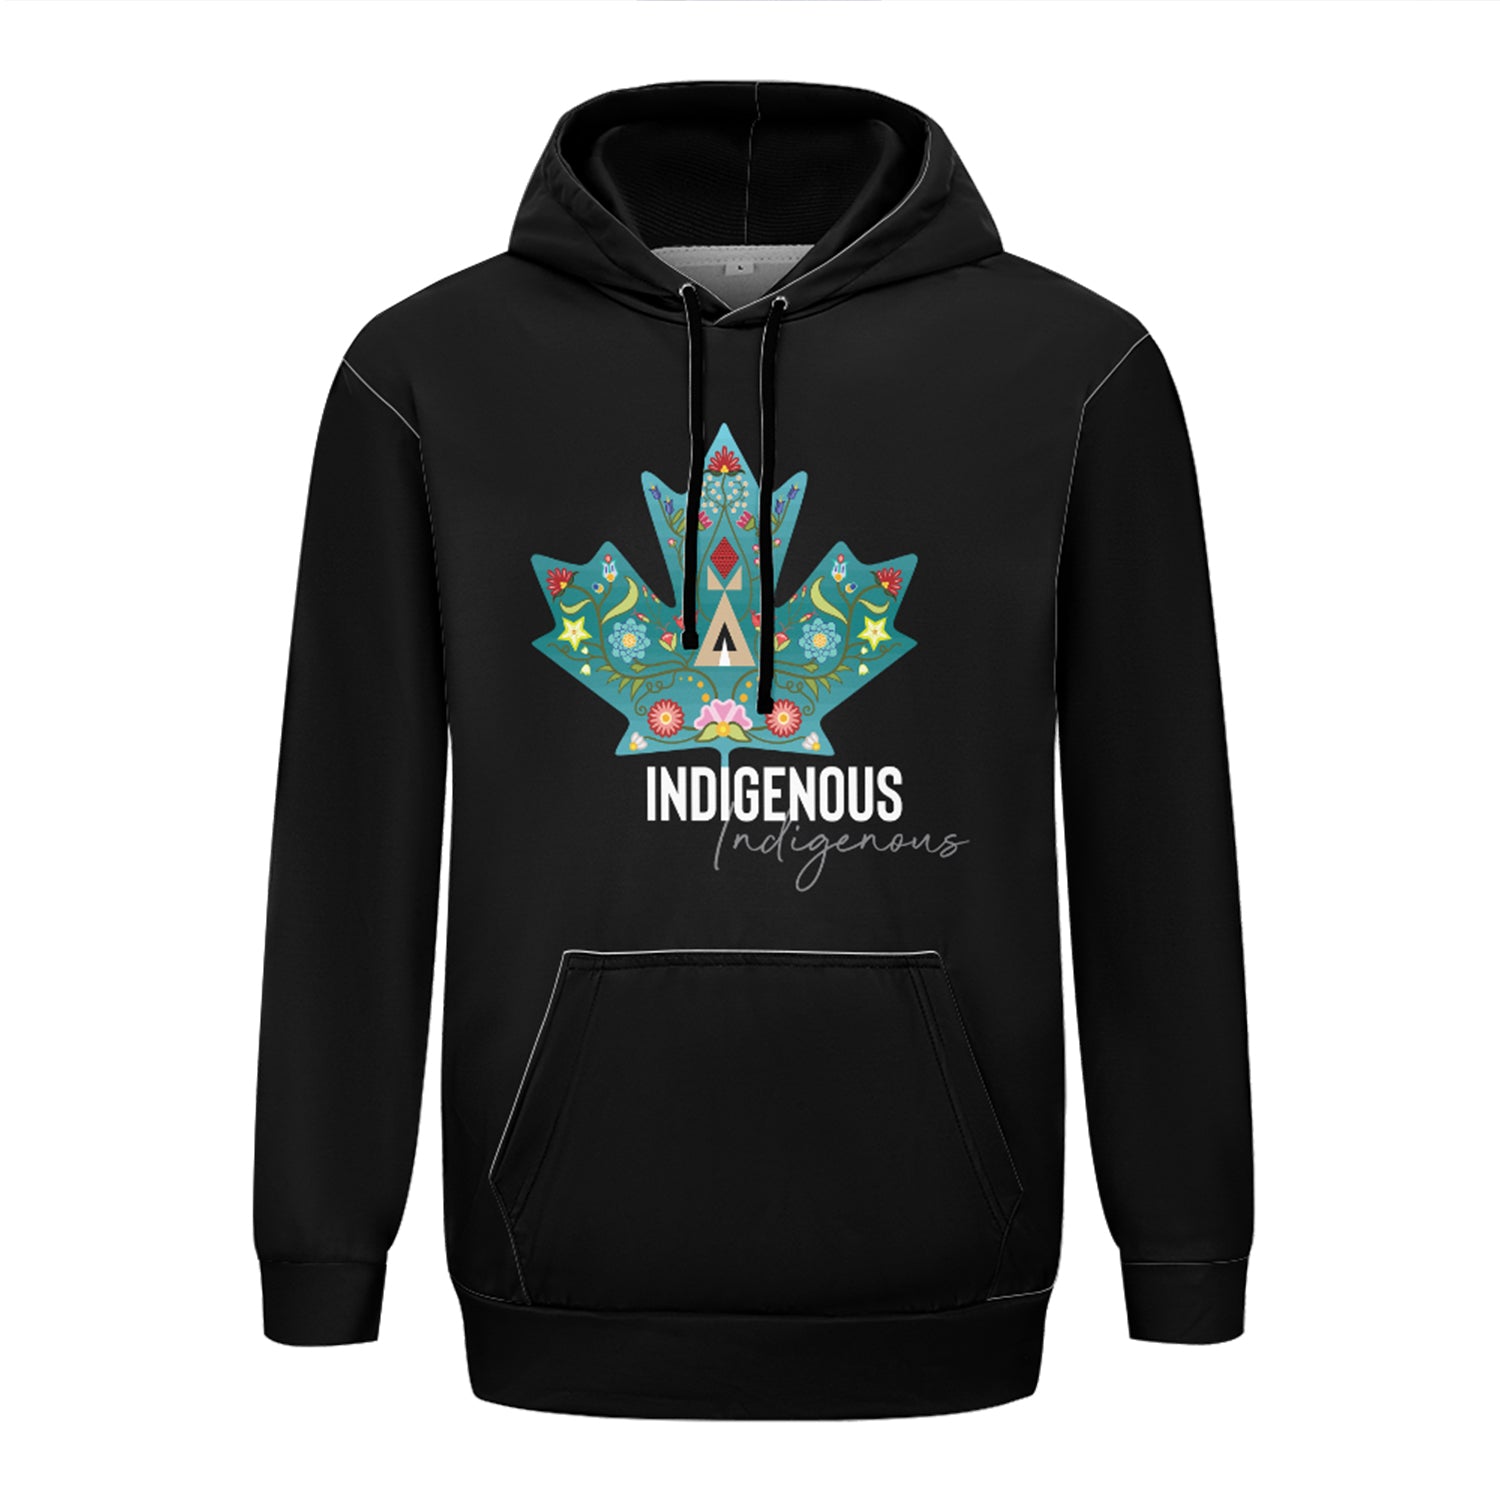 Home and Indigenous Land 49Dzine Novelty Hoodie